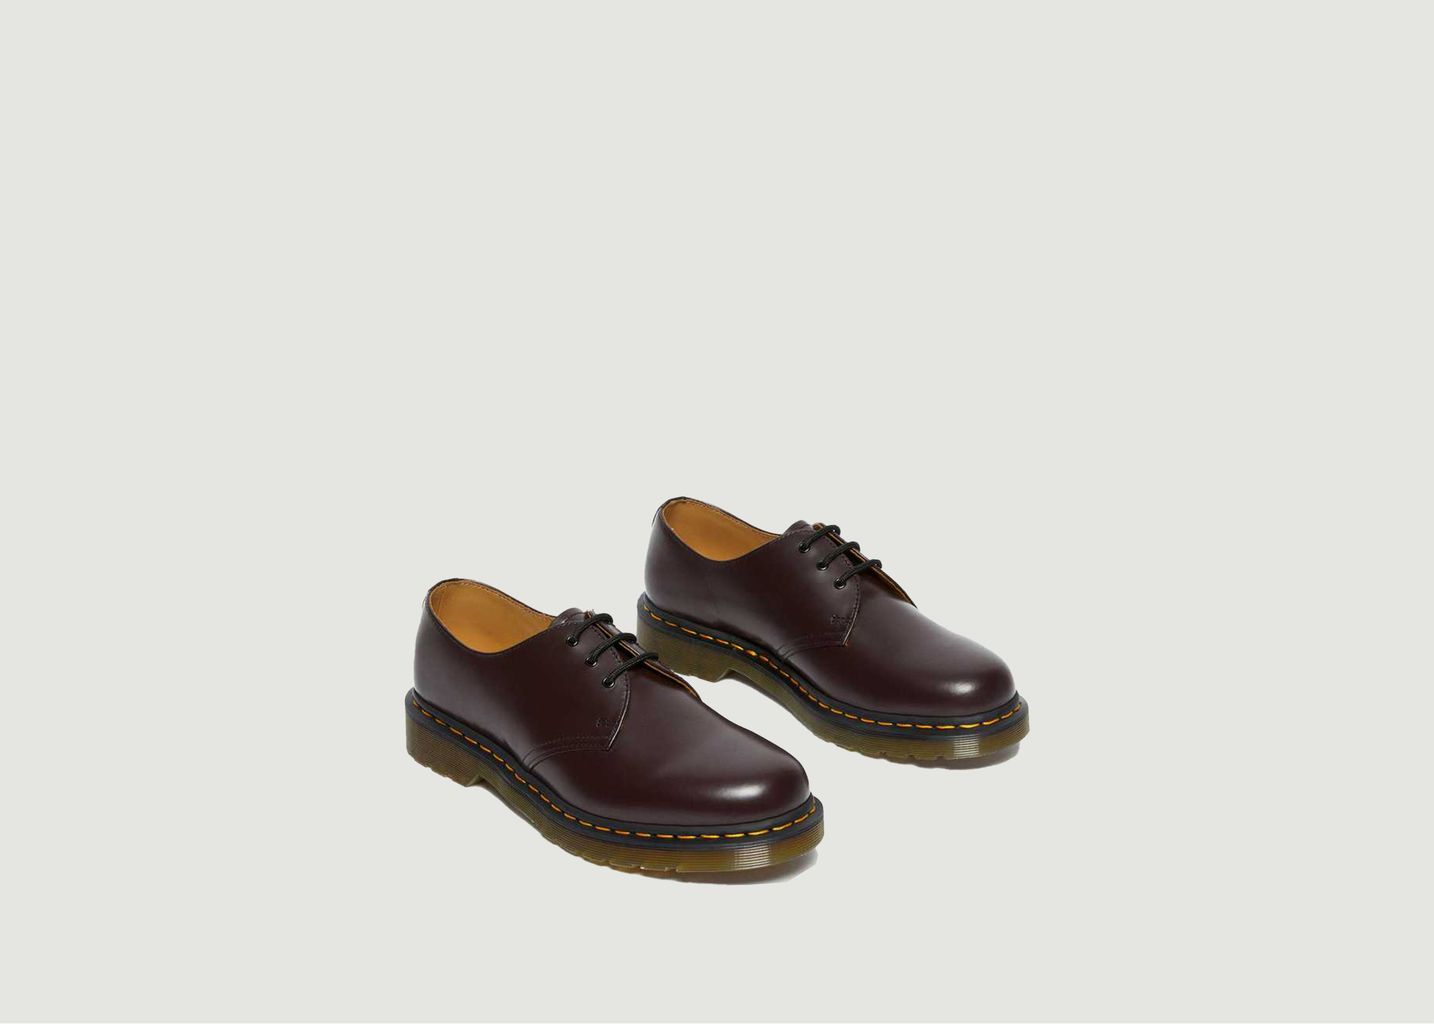 Chaussures 1461 smooth en cuir  - Dr. Martens